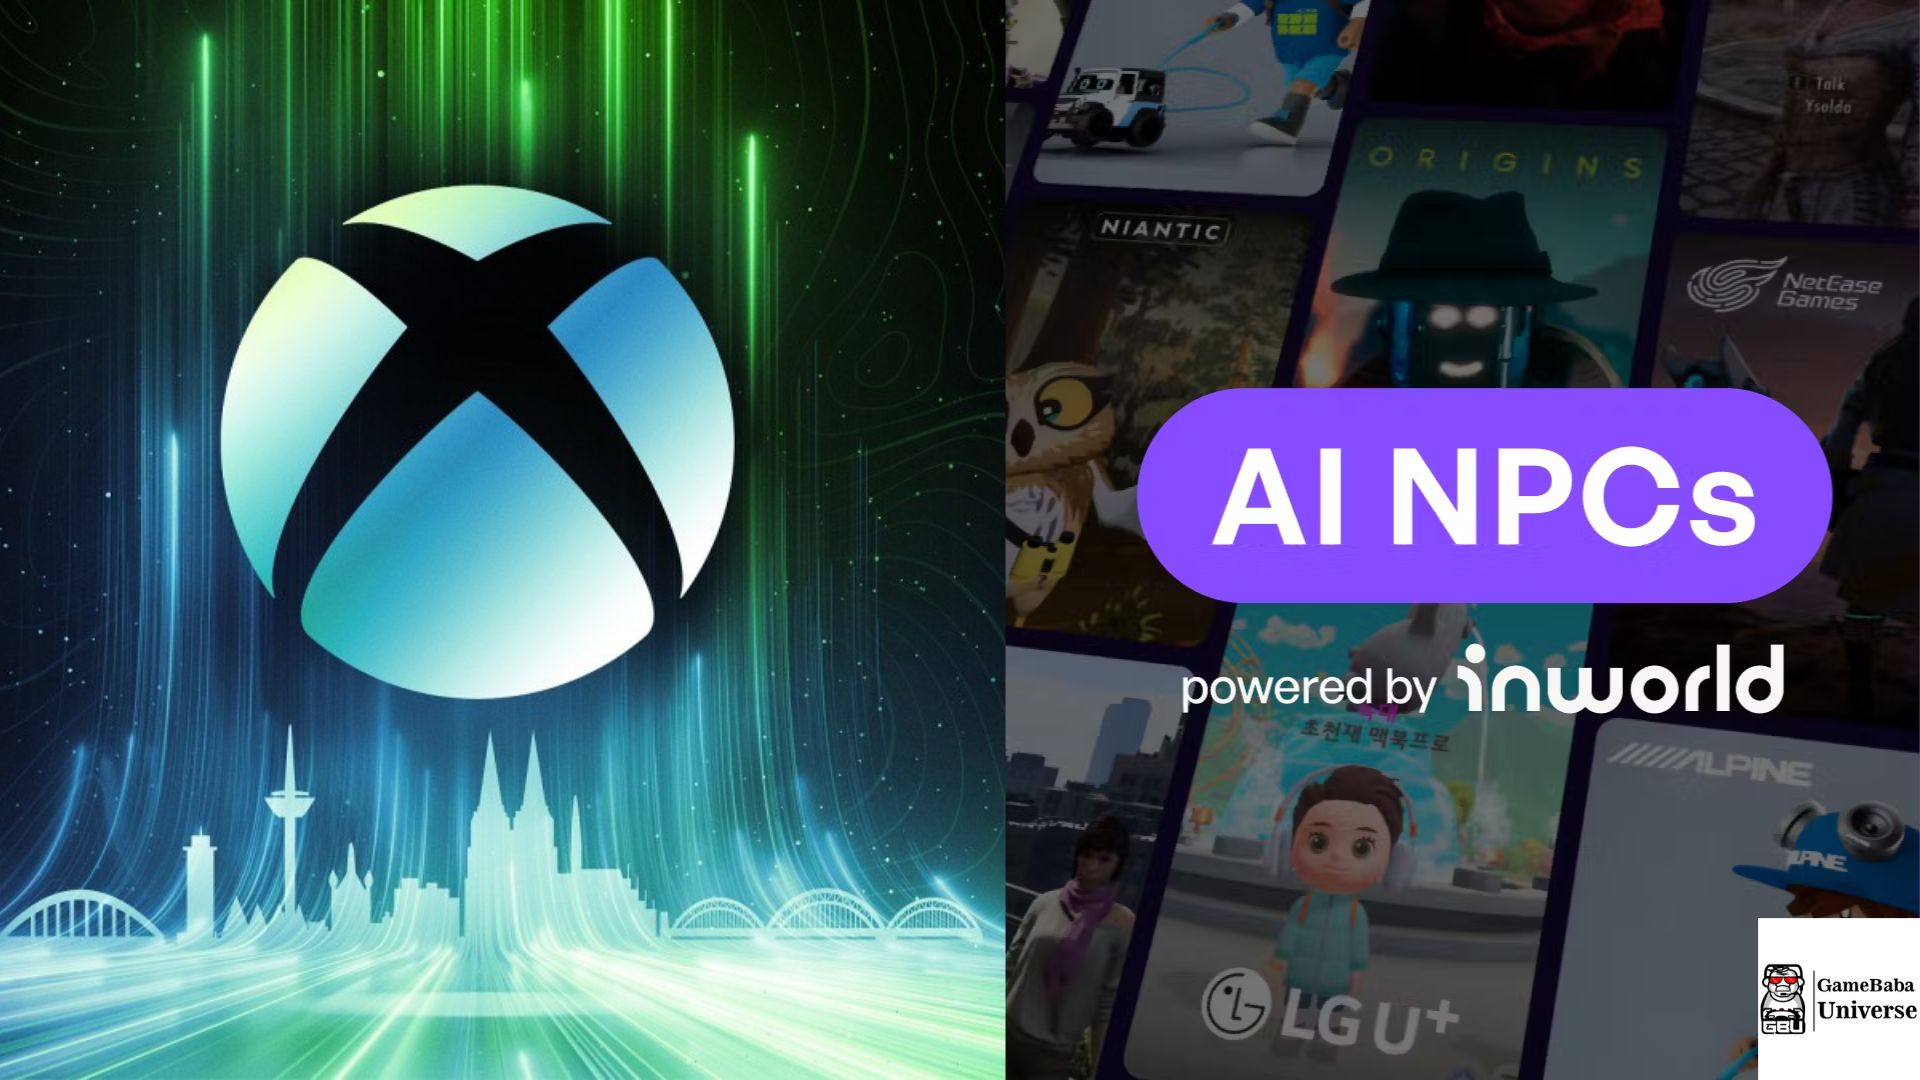 Xbox Multi-Year Partnership With Inworld AI Further Dooms Video Game Workers